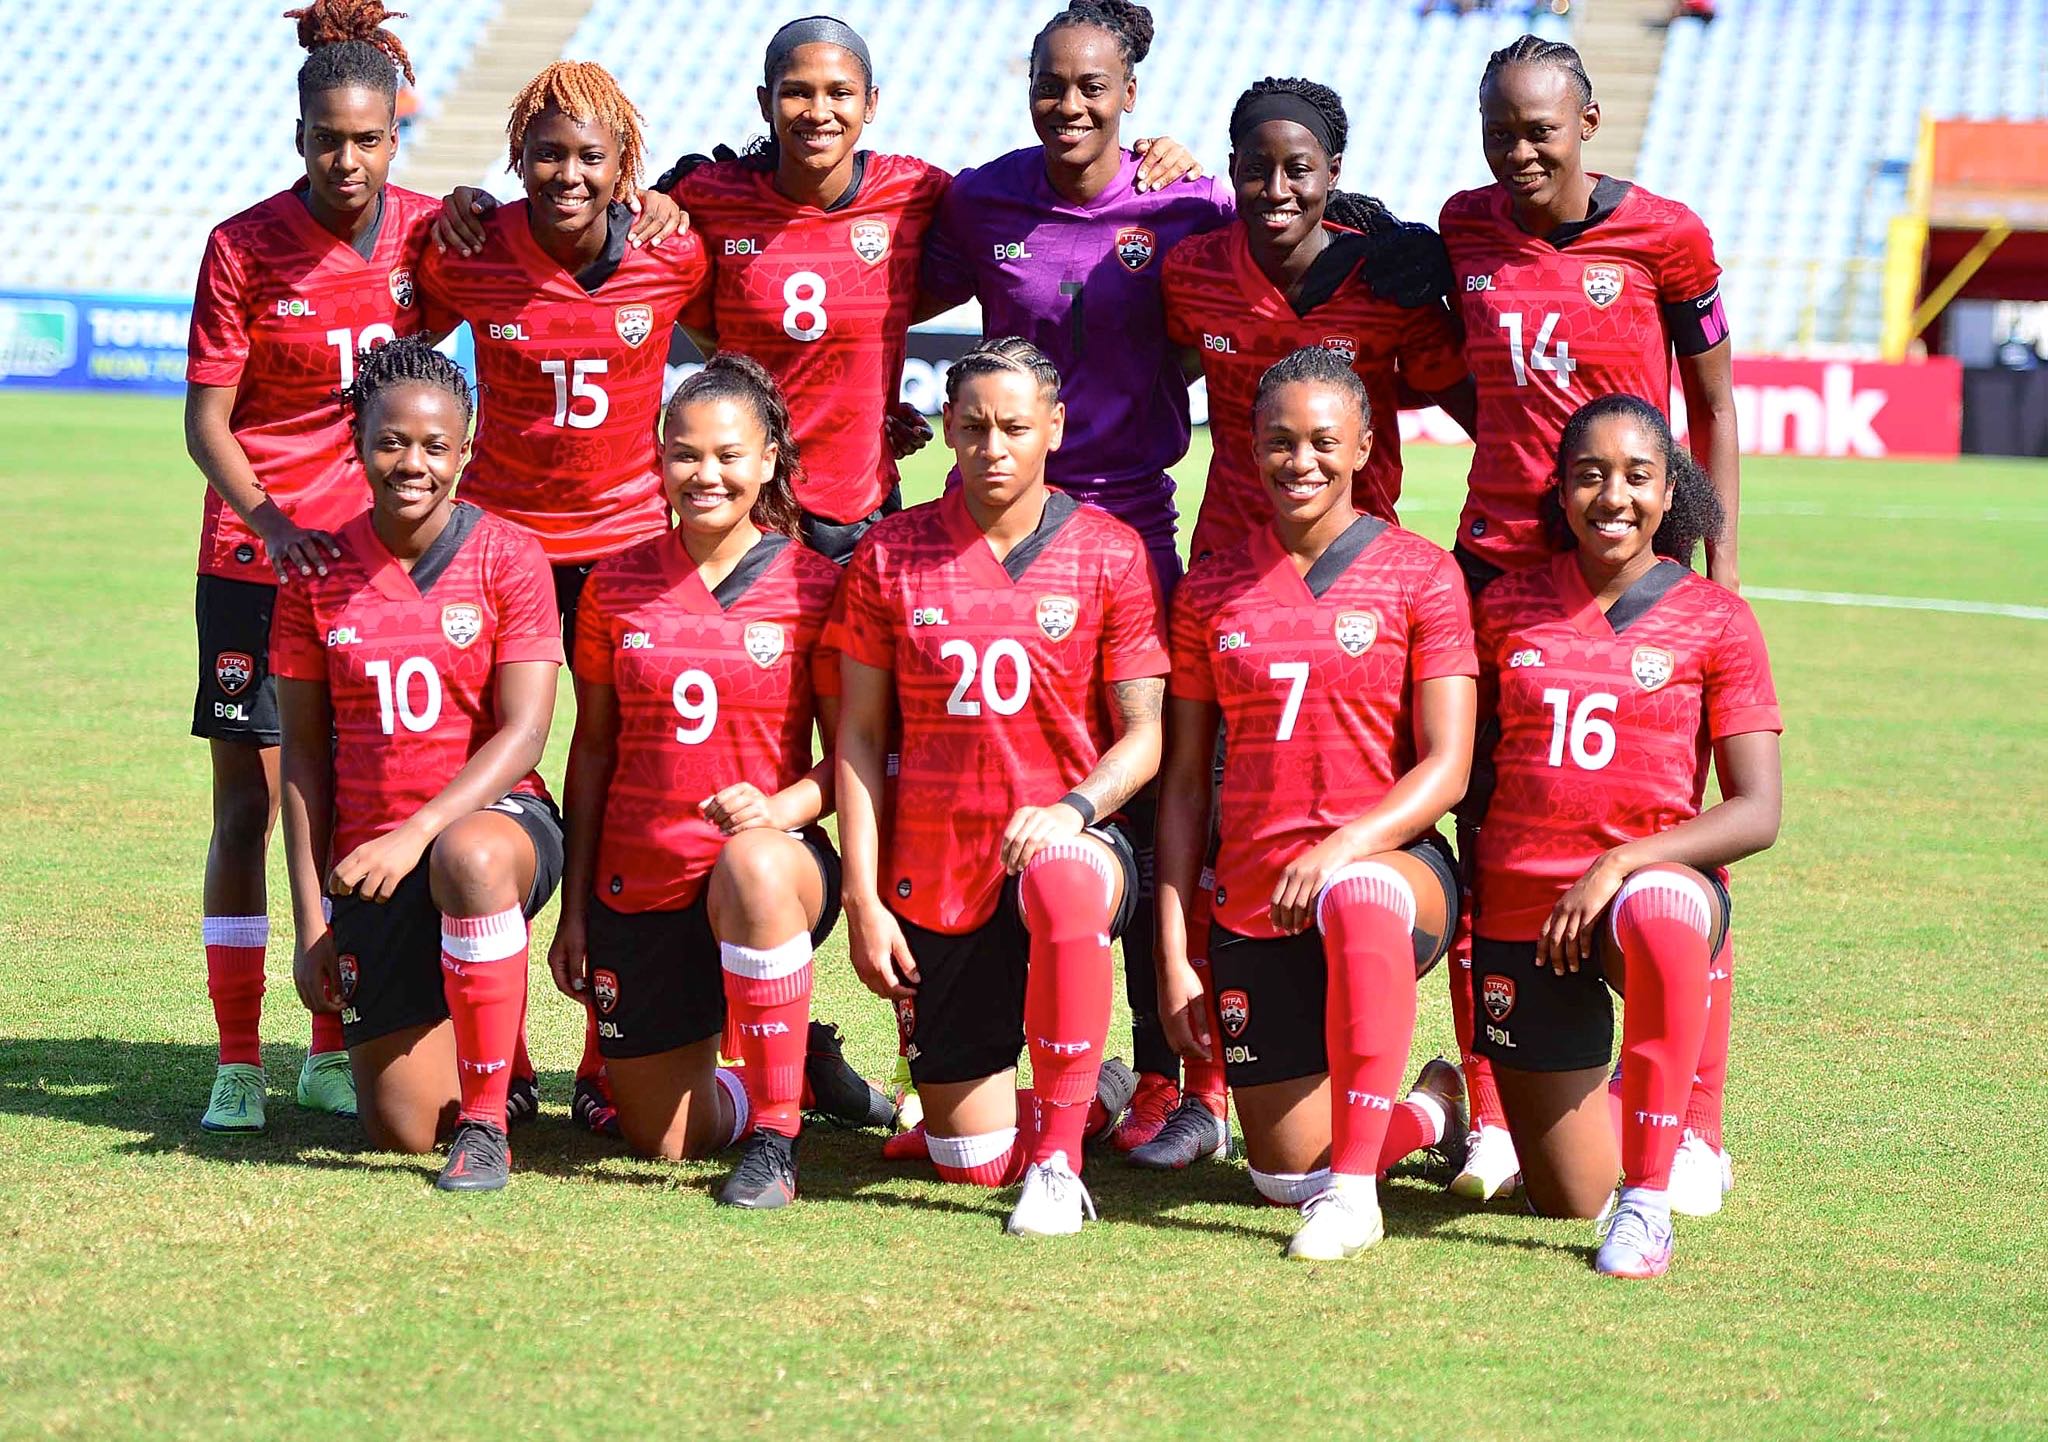 Women Warriors beat Dominica 2-0 to stay perfect in World Cup qualifiers.